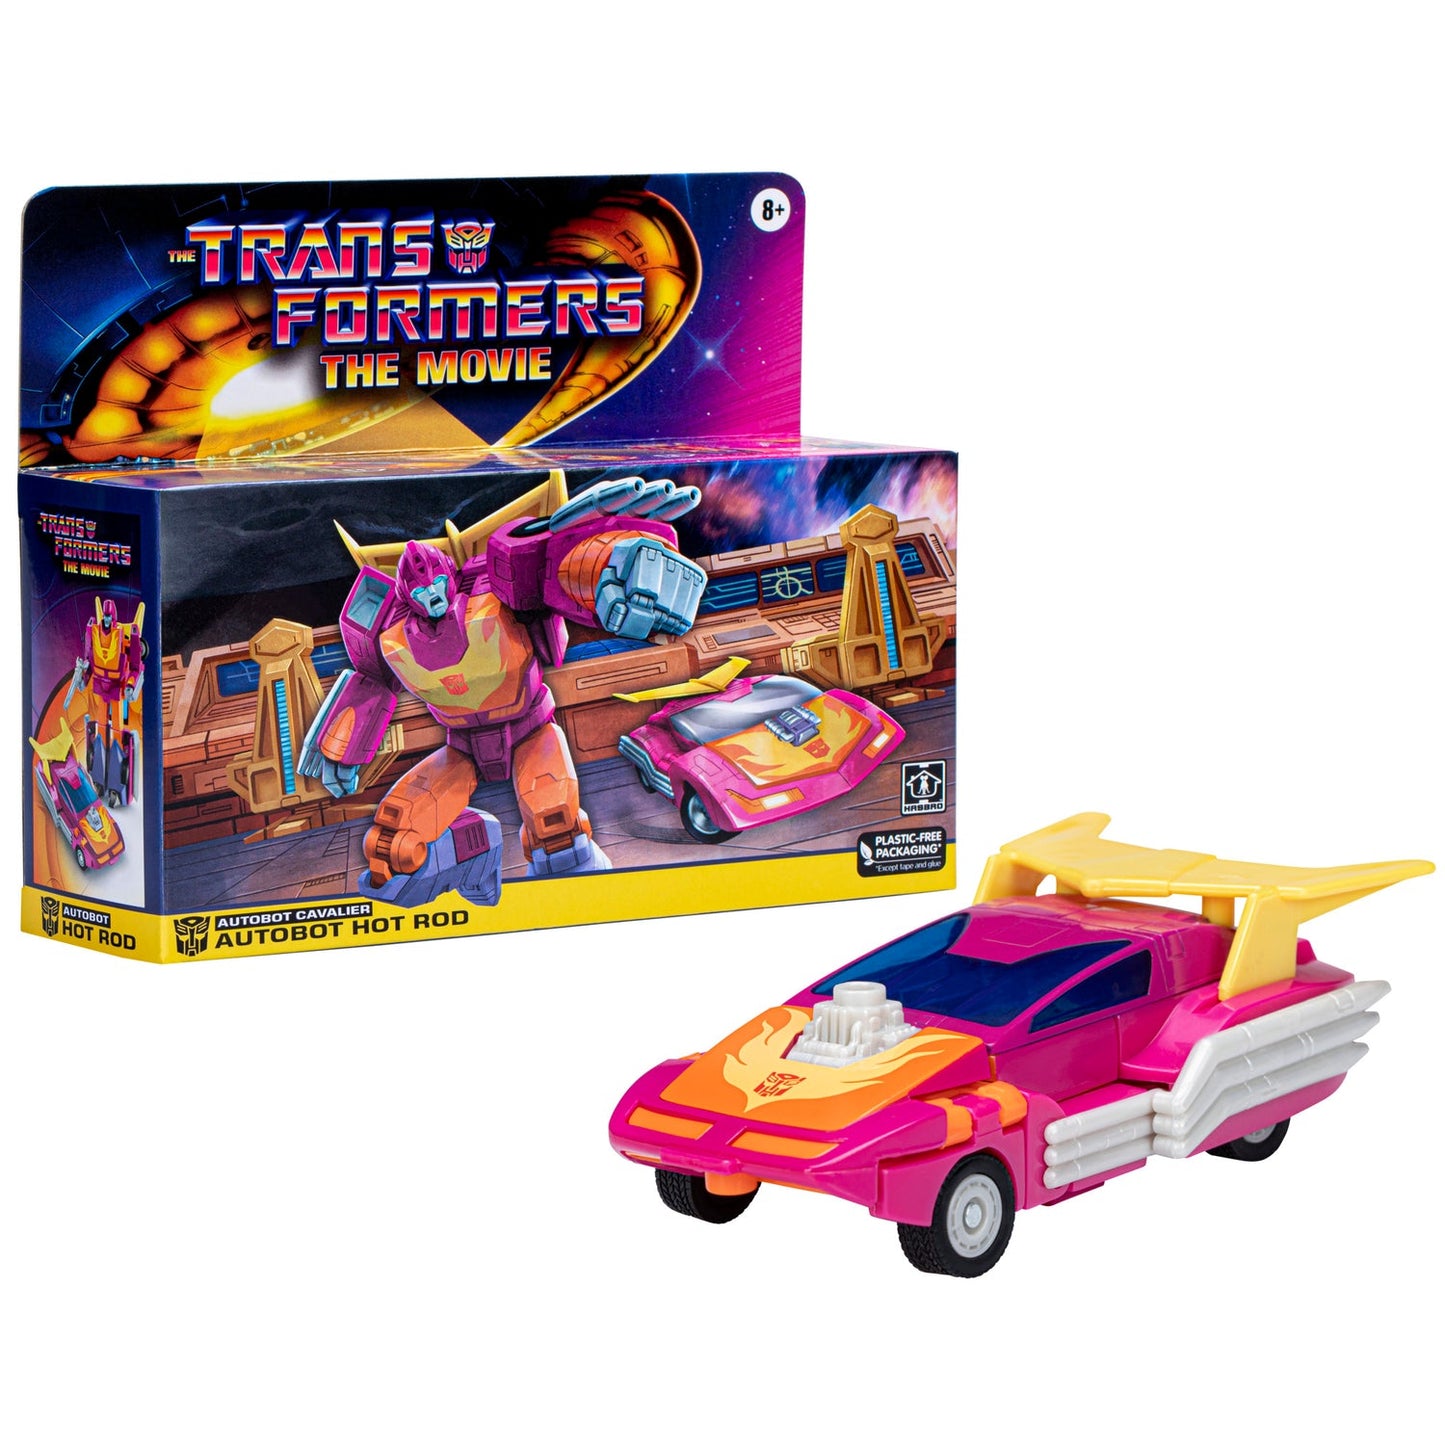 Transformers The Movie: Hot RodTransformers Retro The Transformers: The Movie Autobot Hot Rod